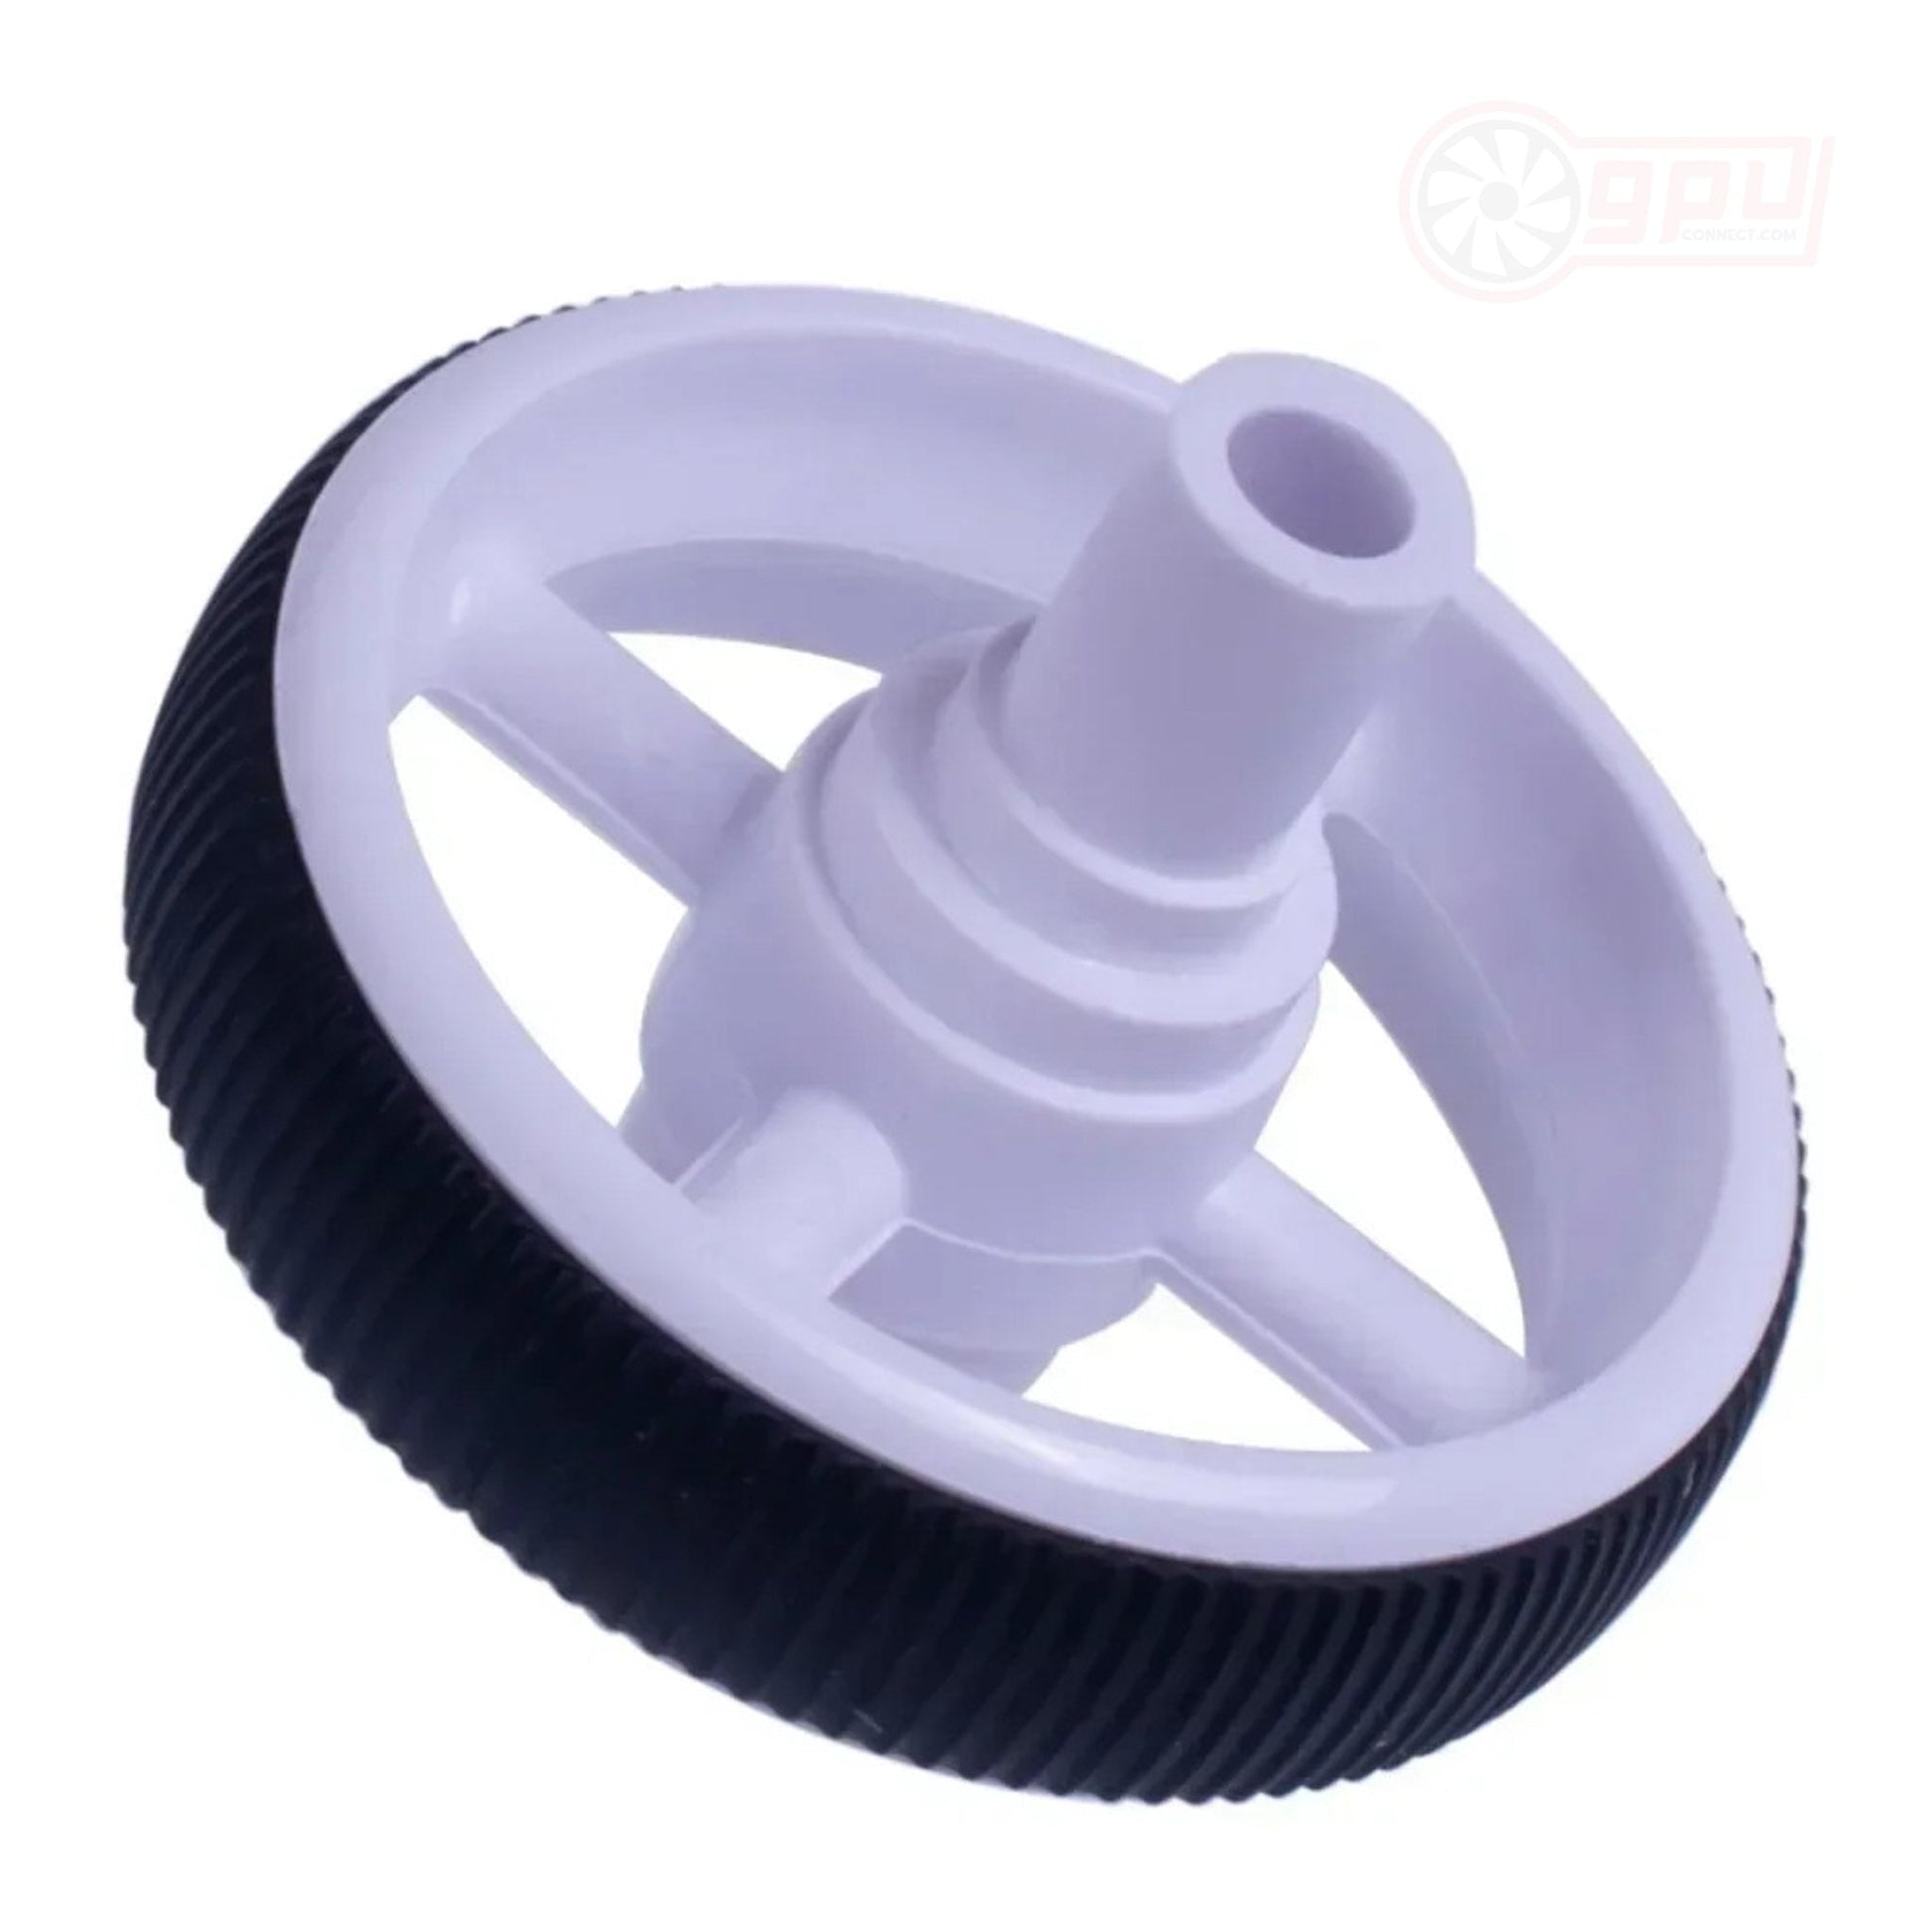 G Pro X Superlight Scroll Wheel Replacement Part for Logitech Mouse - GPUCONNECT.COM